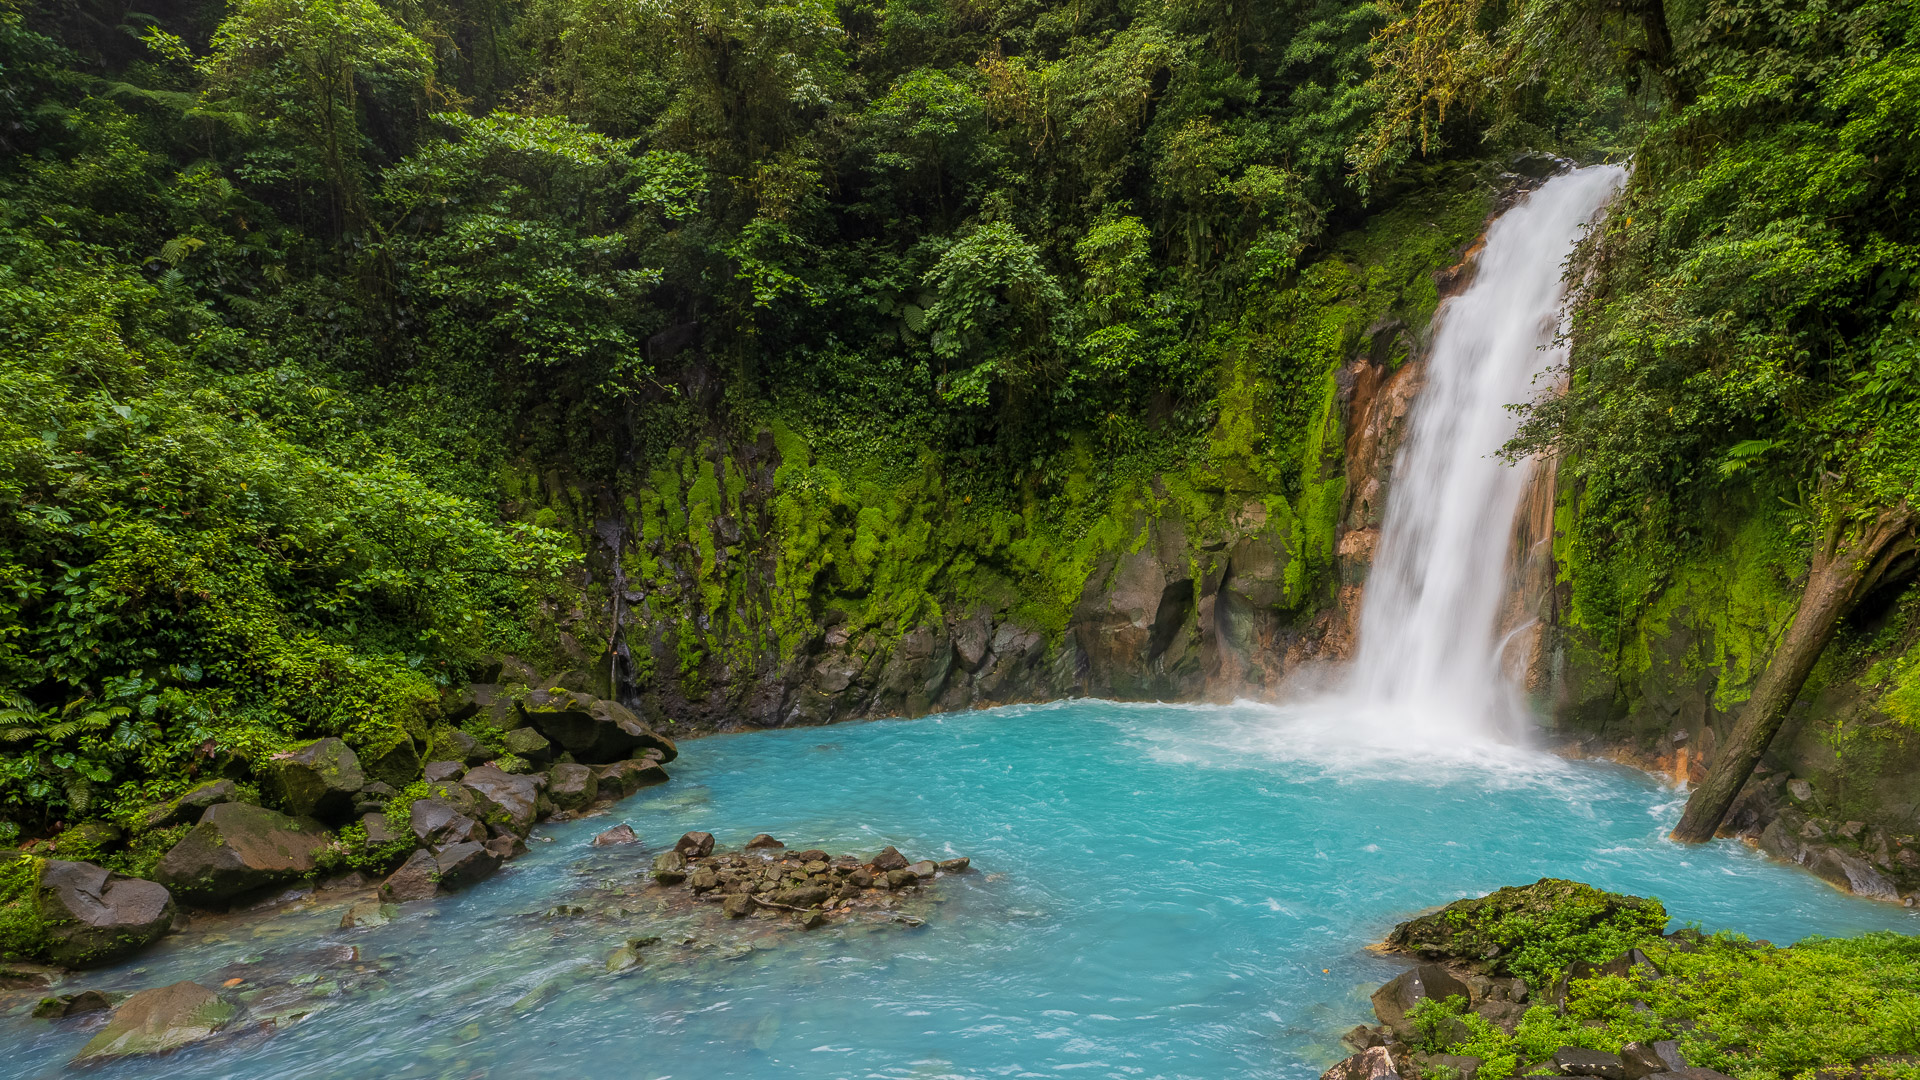 Why is Rio Celeste’s water turquoise-blue?